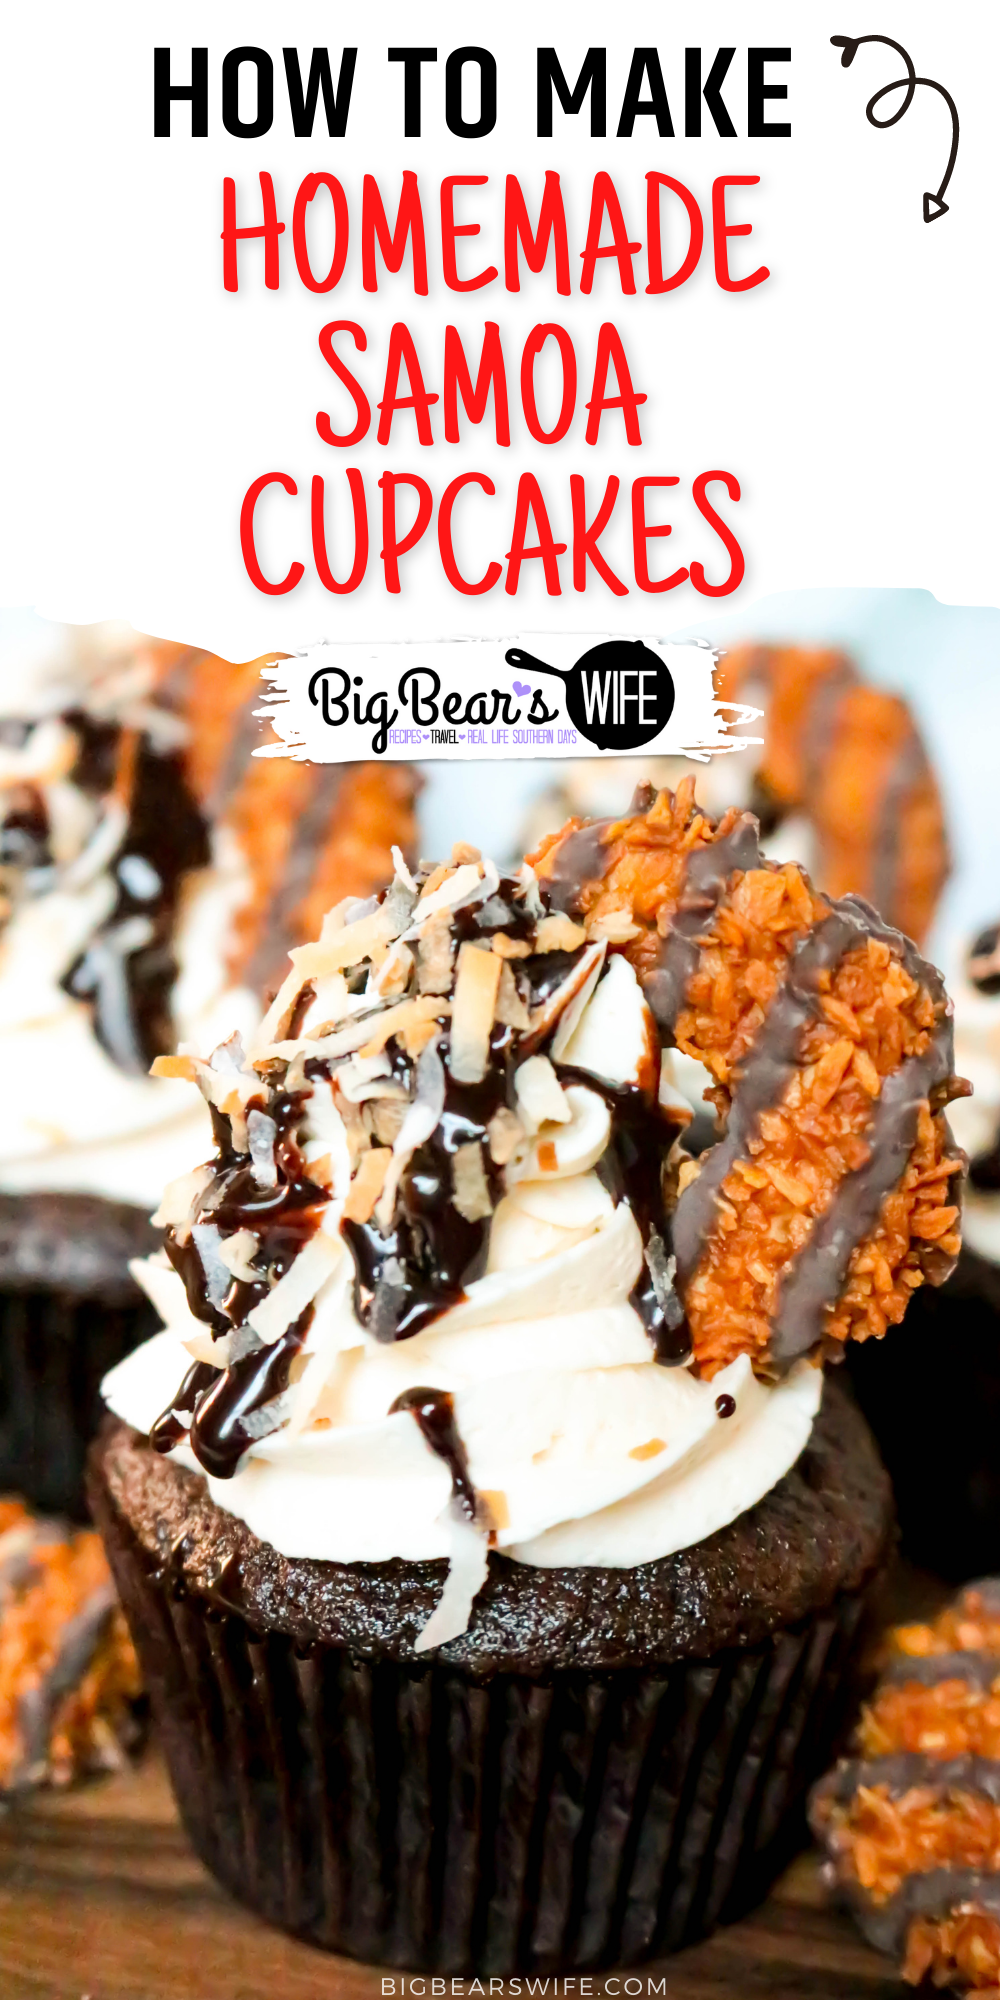 Turn your favorite Samoa cookie Girl Scout cookies into a homemade treat with these Samoa Cupcakes! These chocolate cupcakes have a caramel frosting and are topped with chocolate, toasted coconut and Samoa Cookies! 

 via @bigbearswife